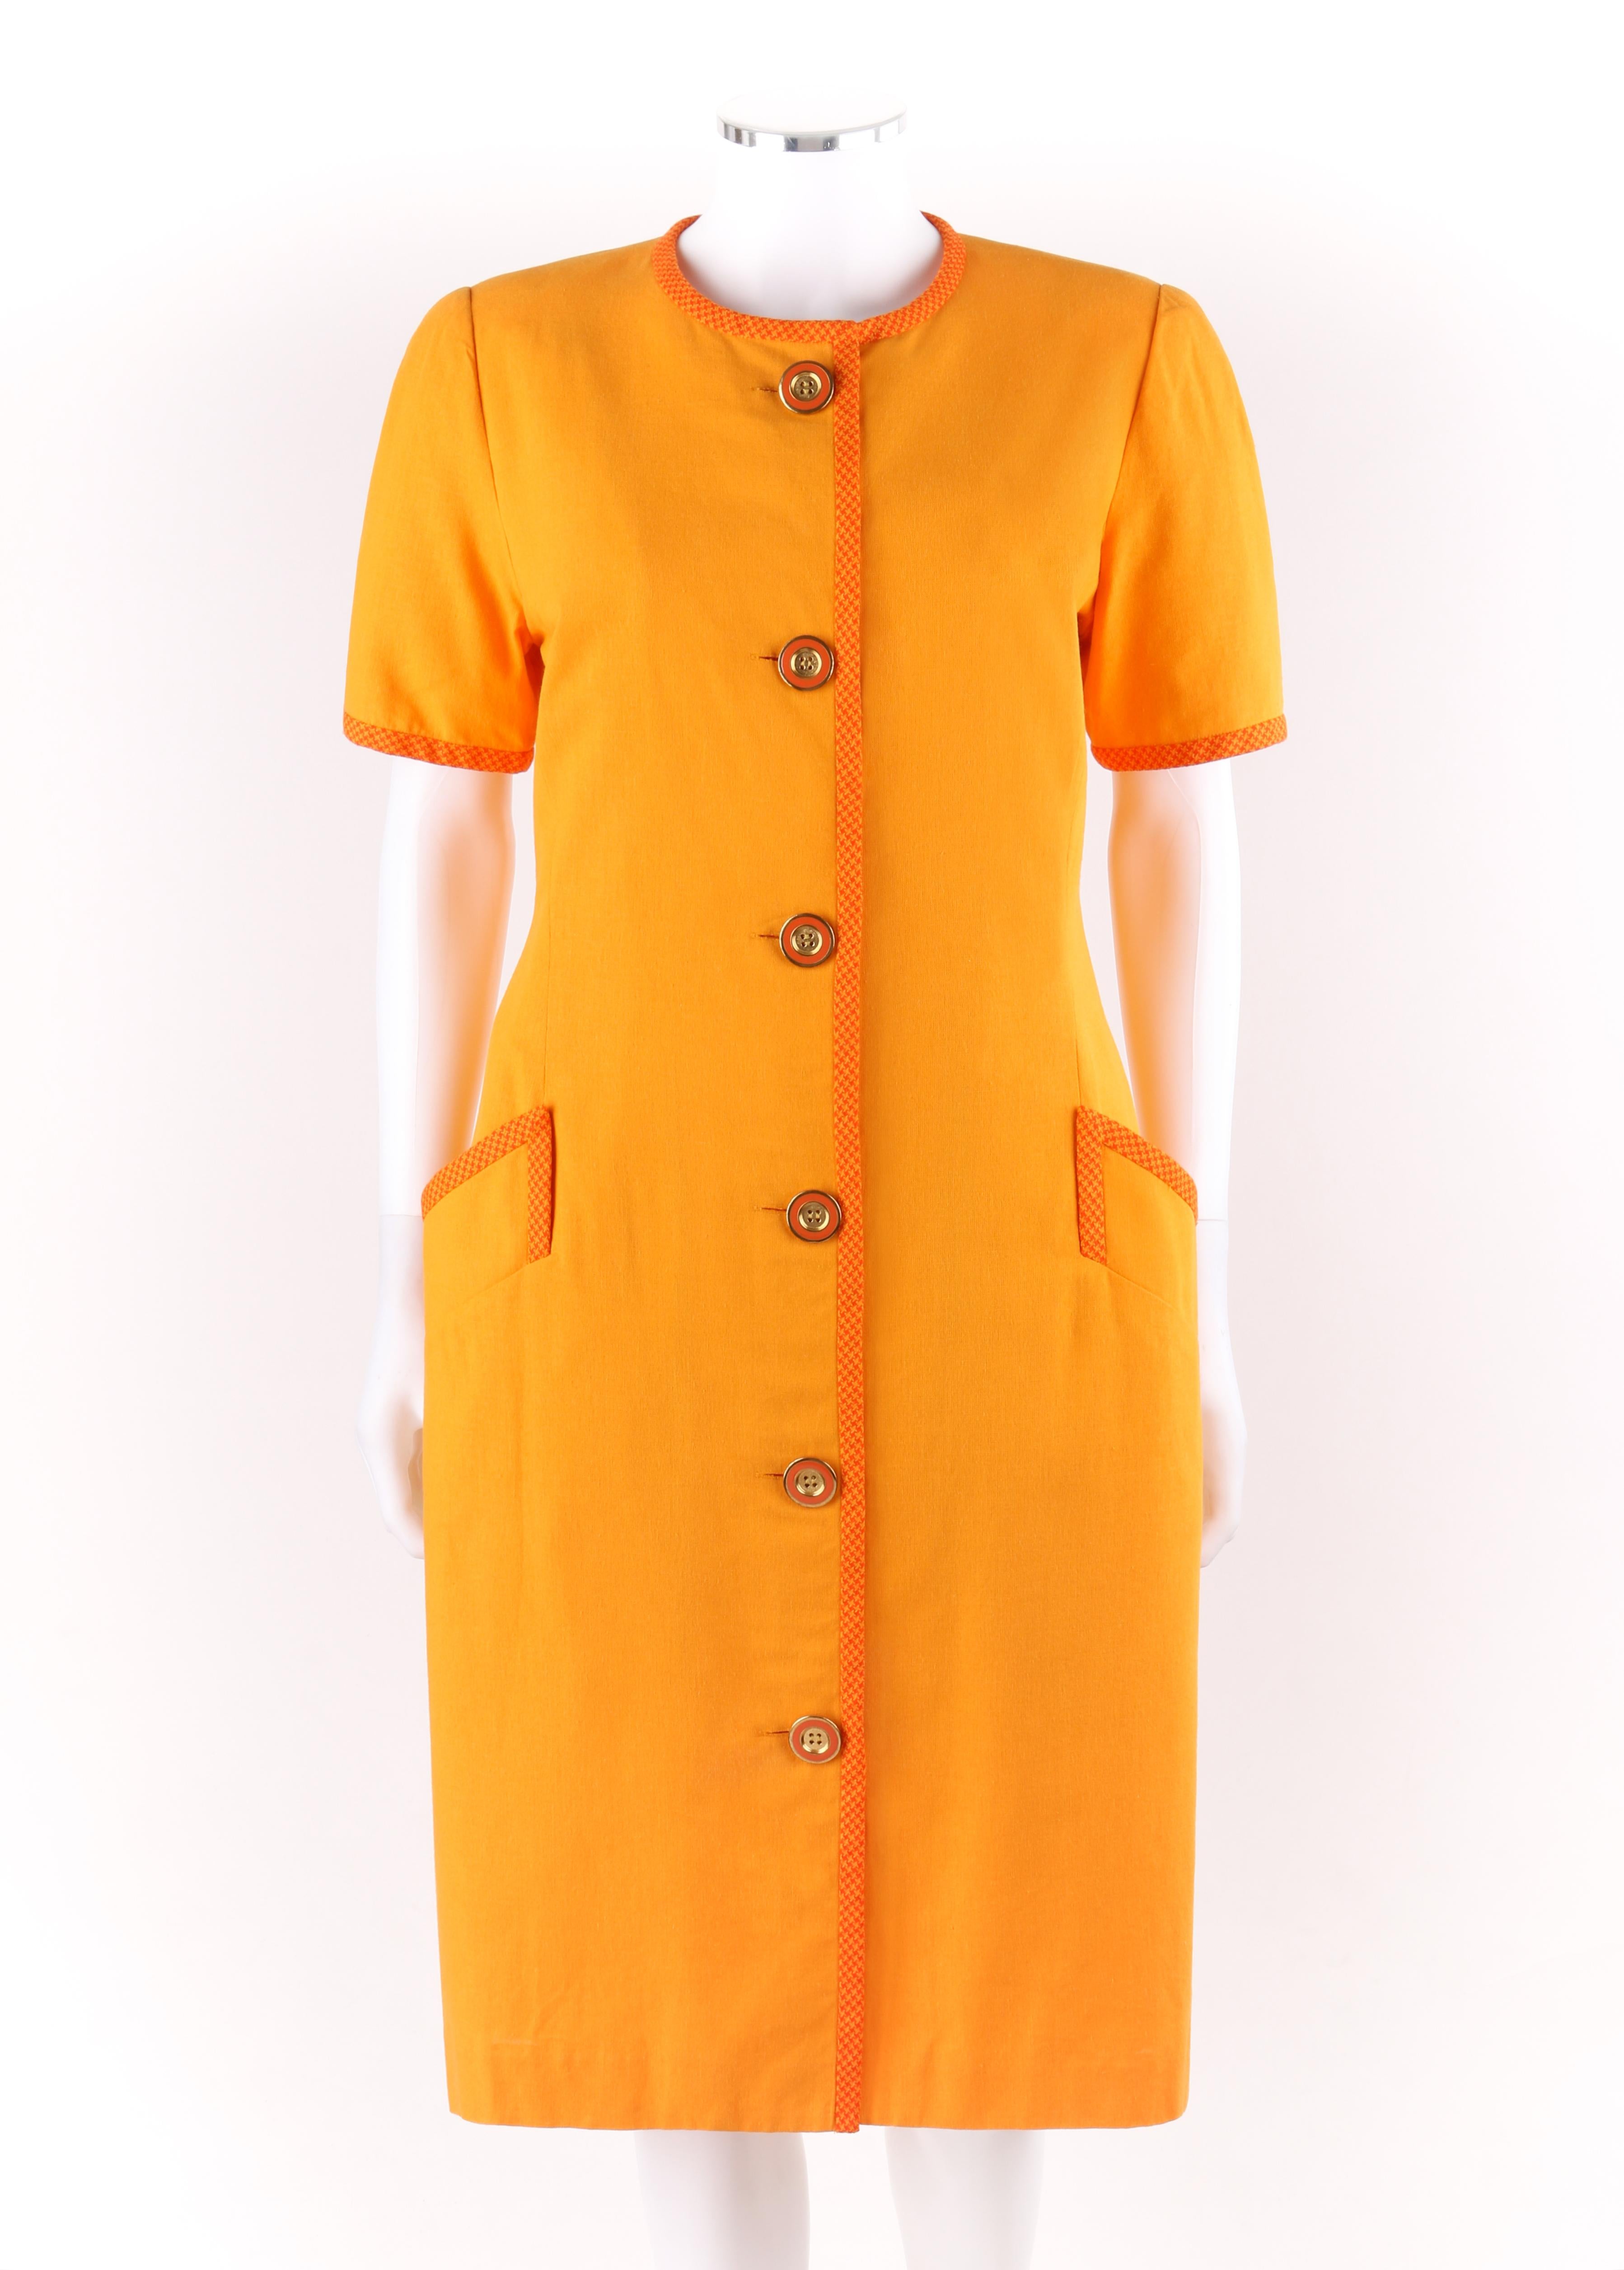 BILL BLASS c.1980’s Orange Houndstooth Trim Short Sleeve Button Up Day Dress

Circa: 1980’s 
Label(s): Bill Blass Dress
Designer: Bill Blass
Style: Sheath day dress
Color(s): Shades of orange  
Lined: Yes
Marked Fabric Content: “70% Rayon, 30%